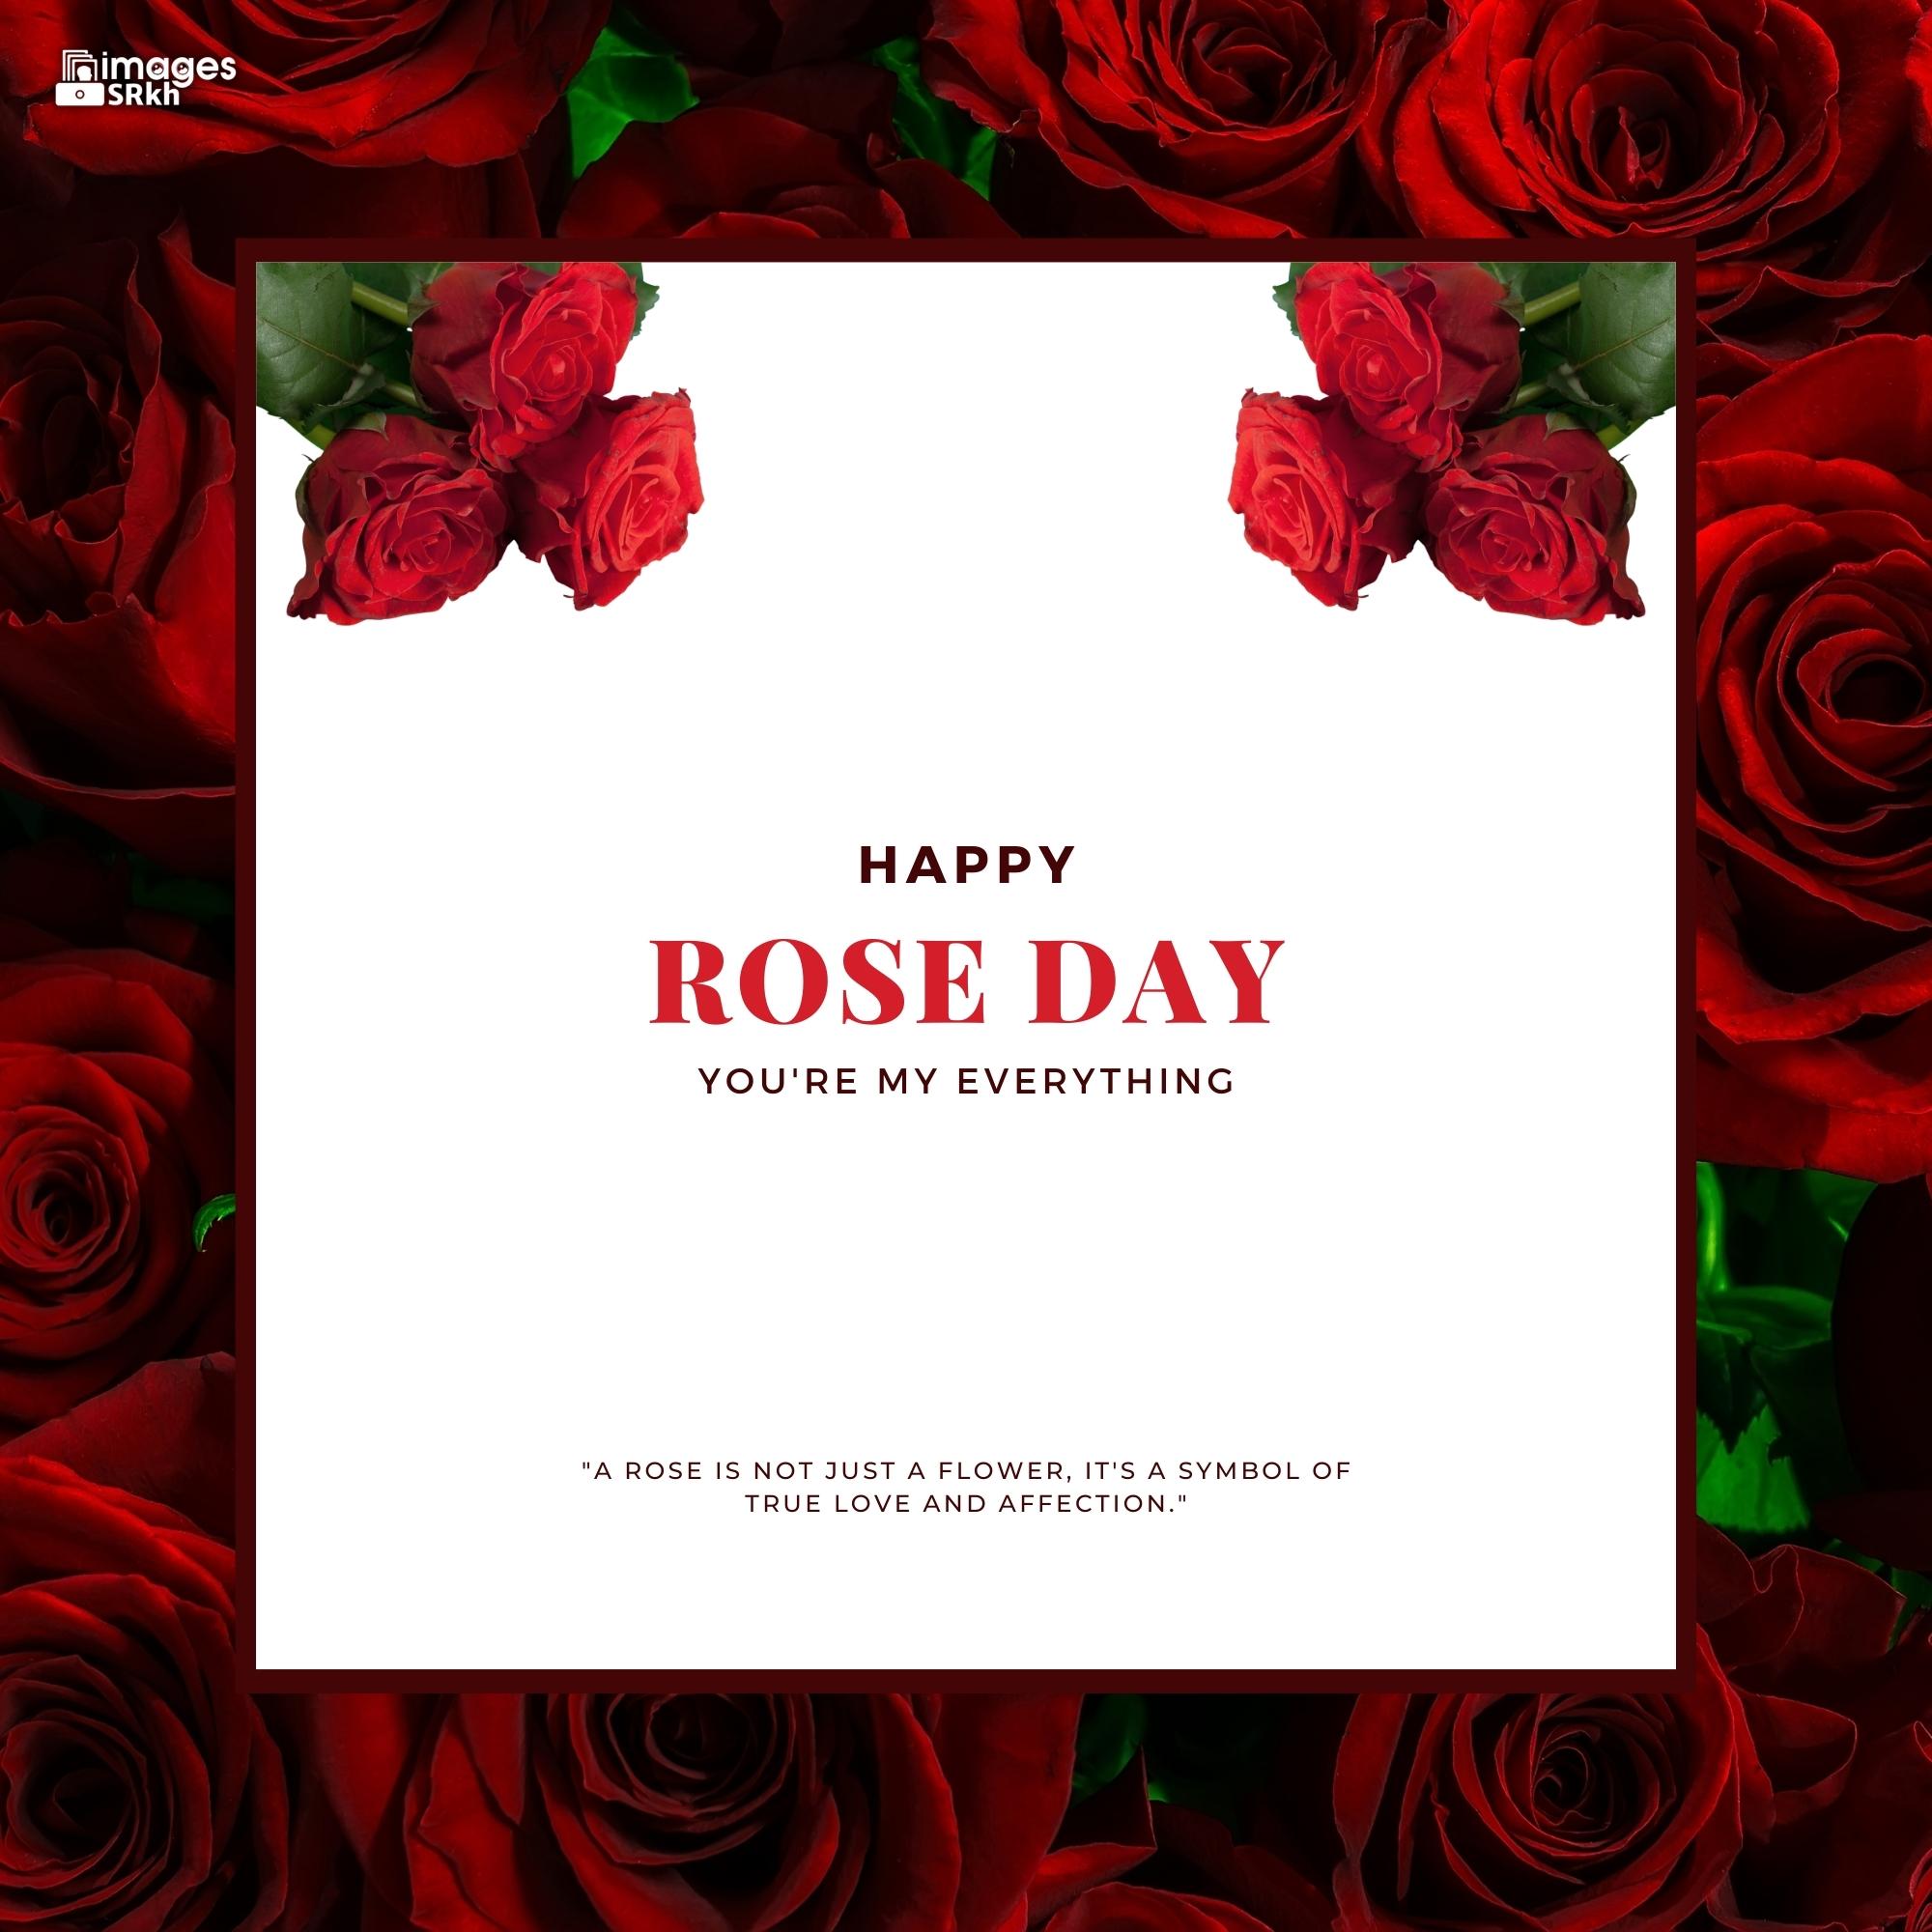 Happy Rose Day Image Hd Download (73)